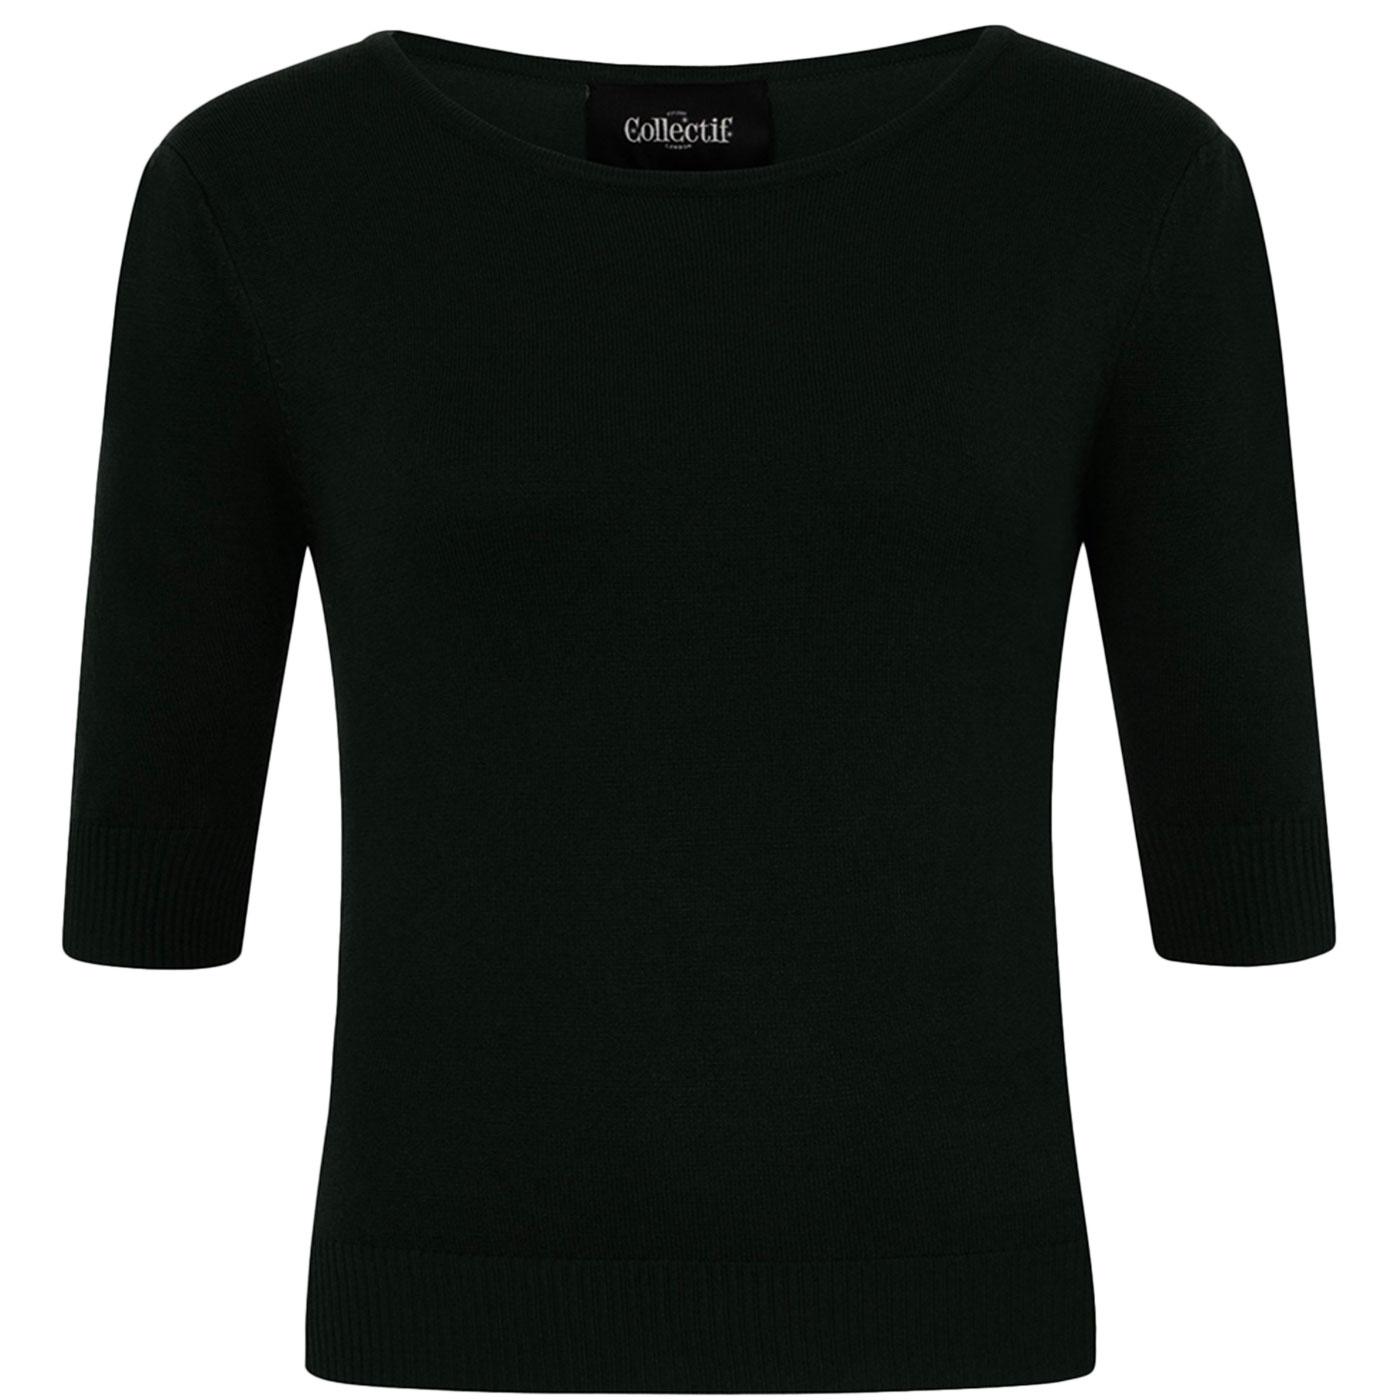 Chrissie COLLECTIF Vintage Knitted Top in Black